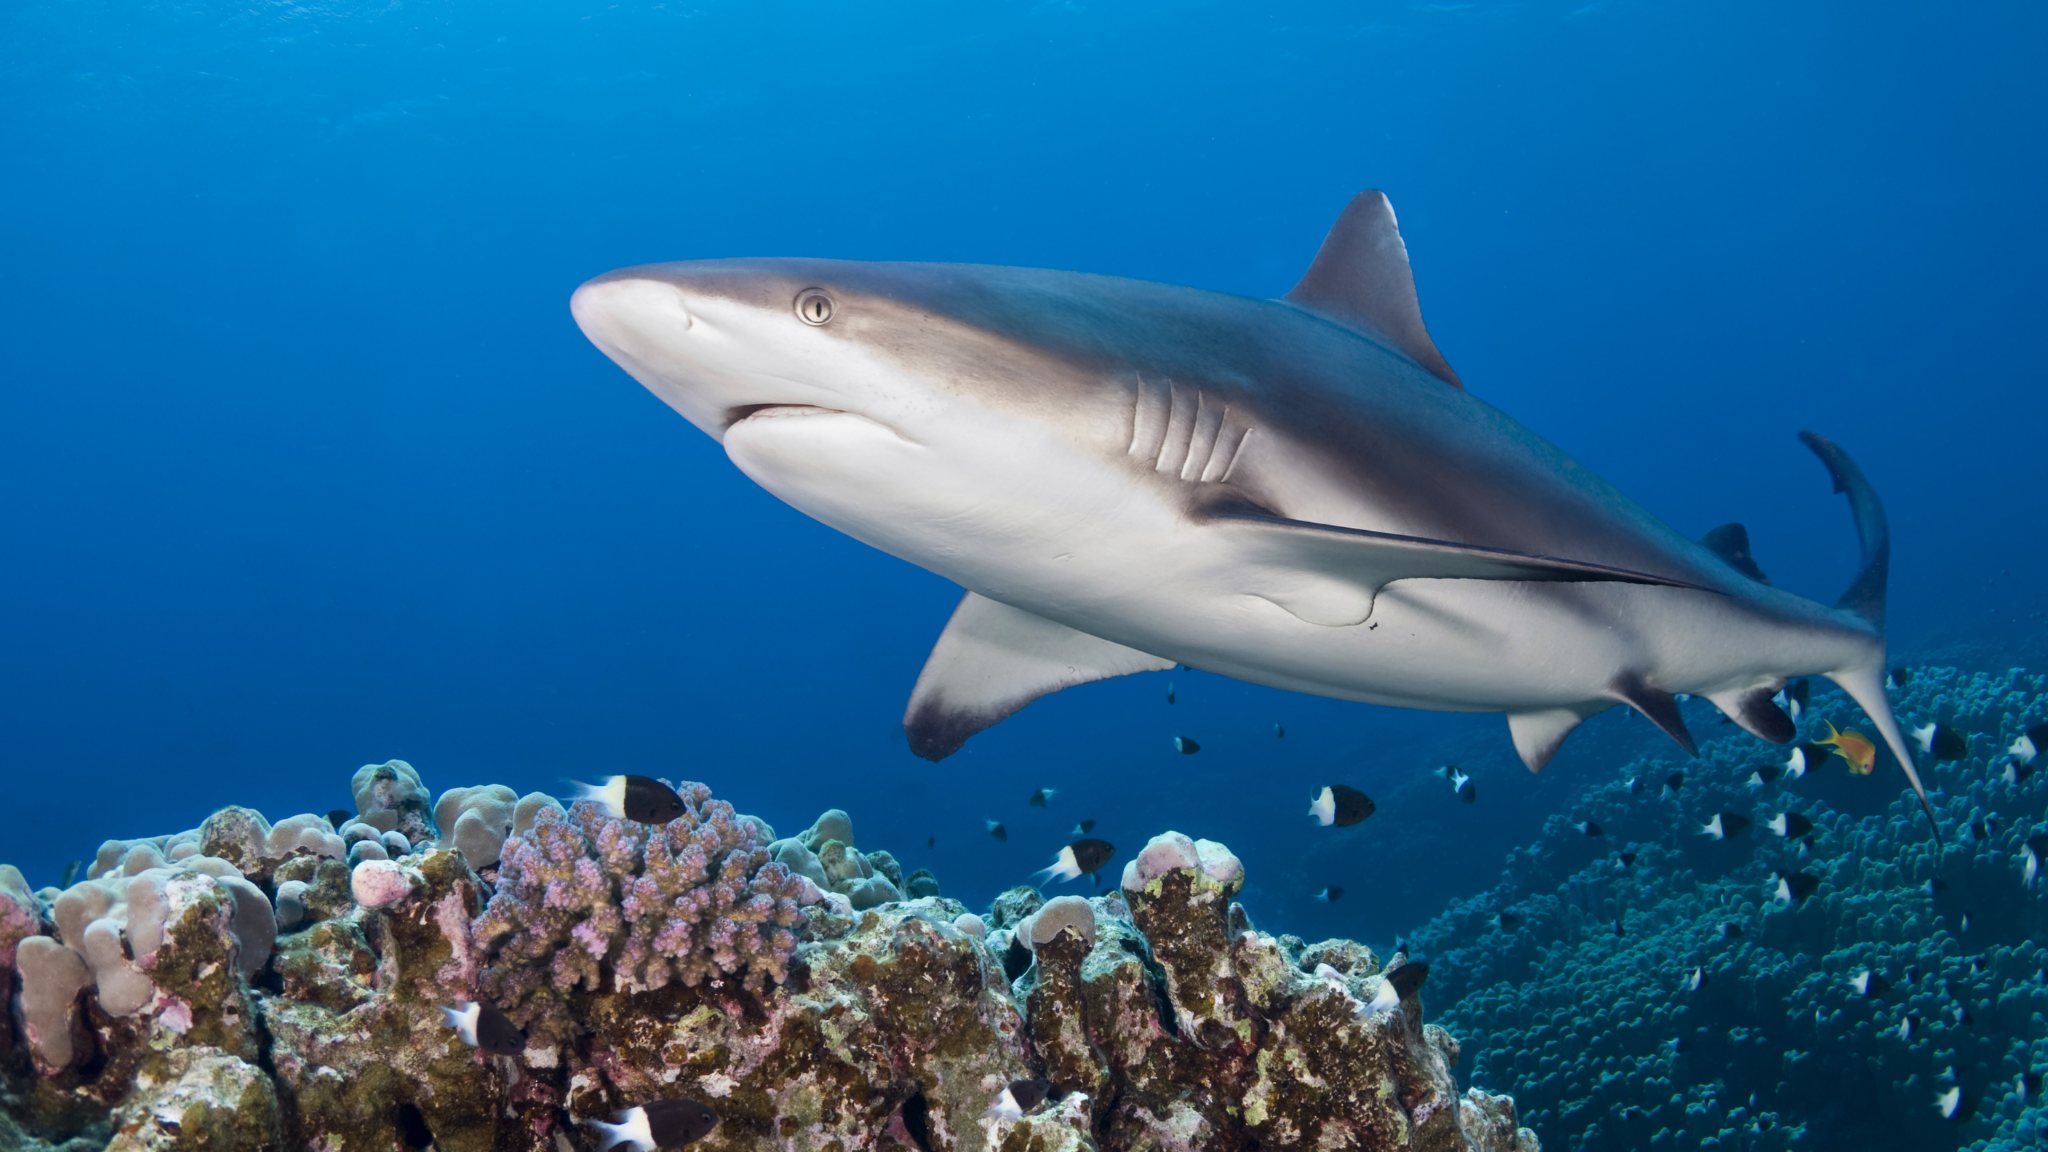 A gray reef shark swims above a coral reef at Blue Corner in Palau which is one of the world's best shark diving destinations